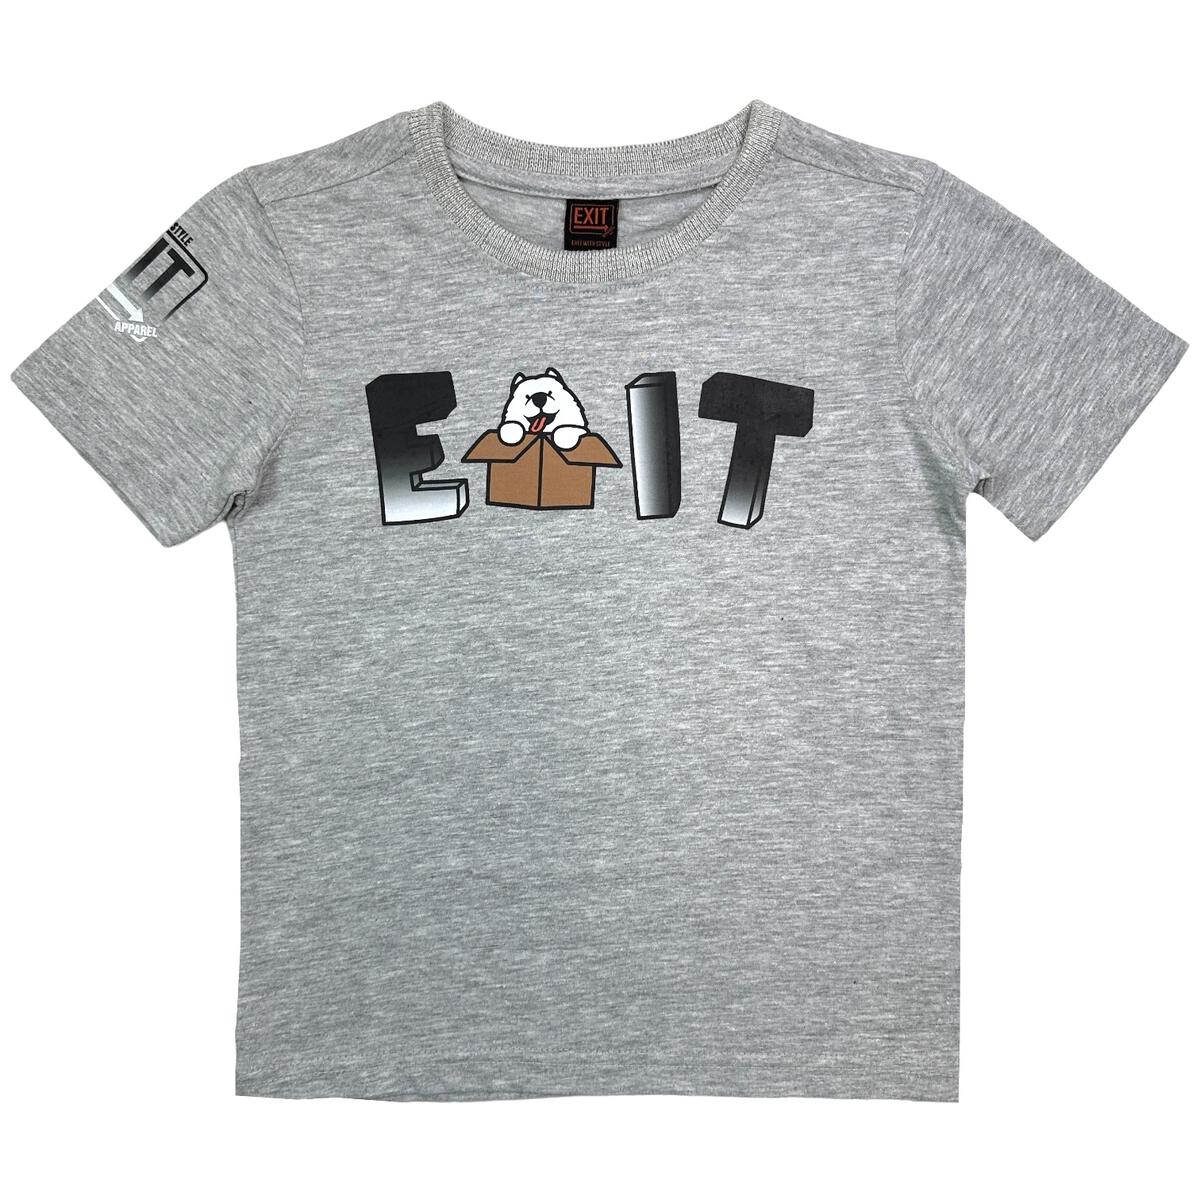 Kids "Out of the Box" Tee - Grey